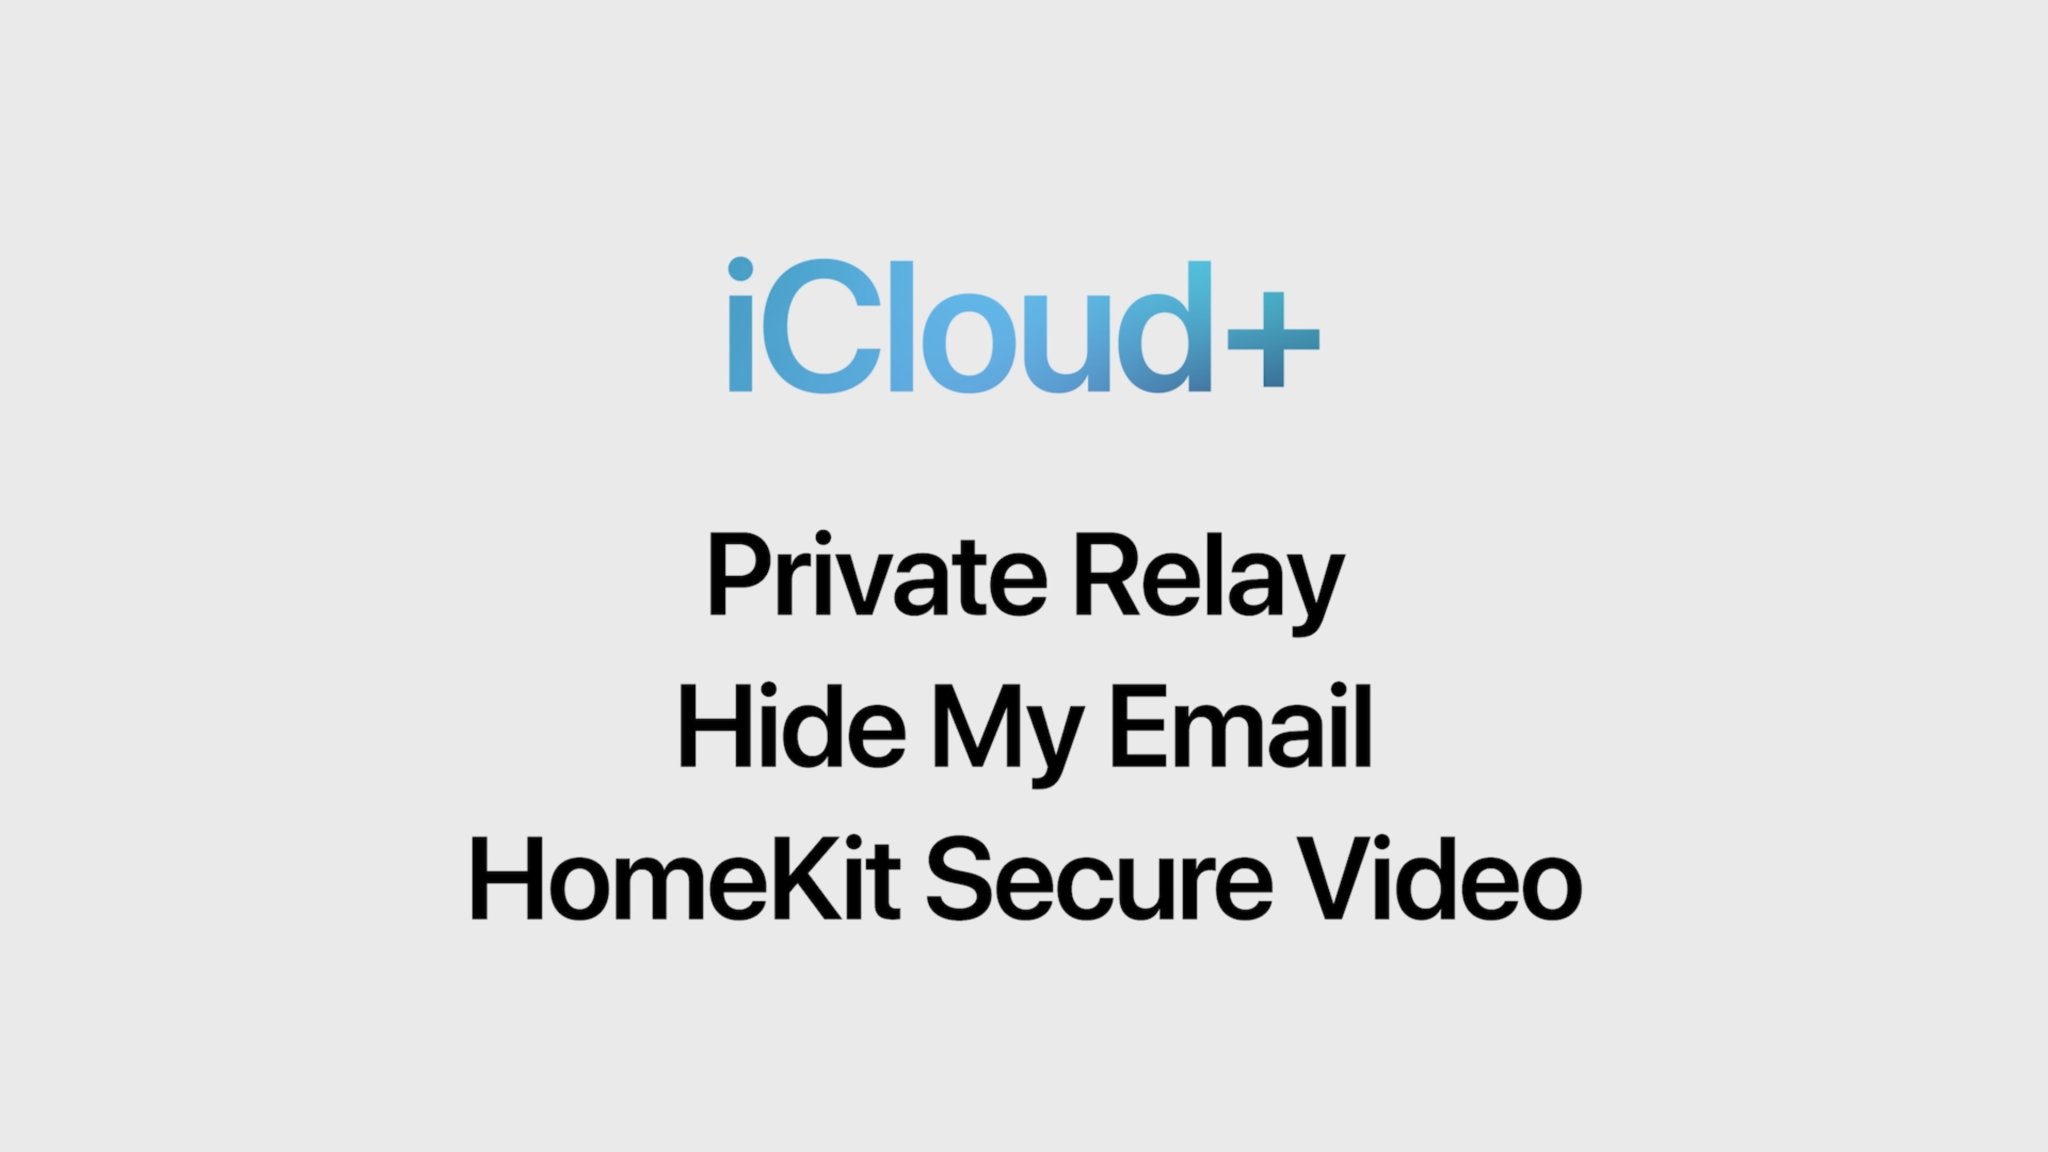 Apple announces iCloud+ with privacy-focused features